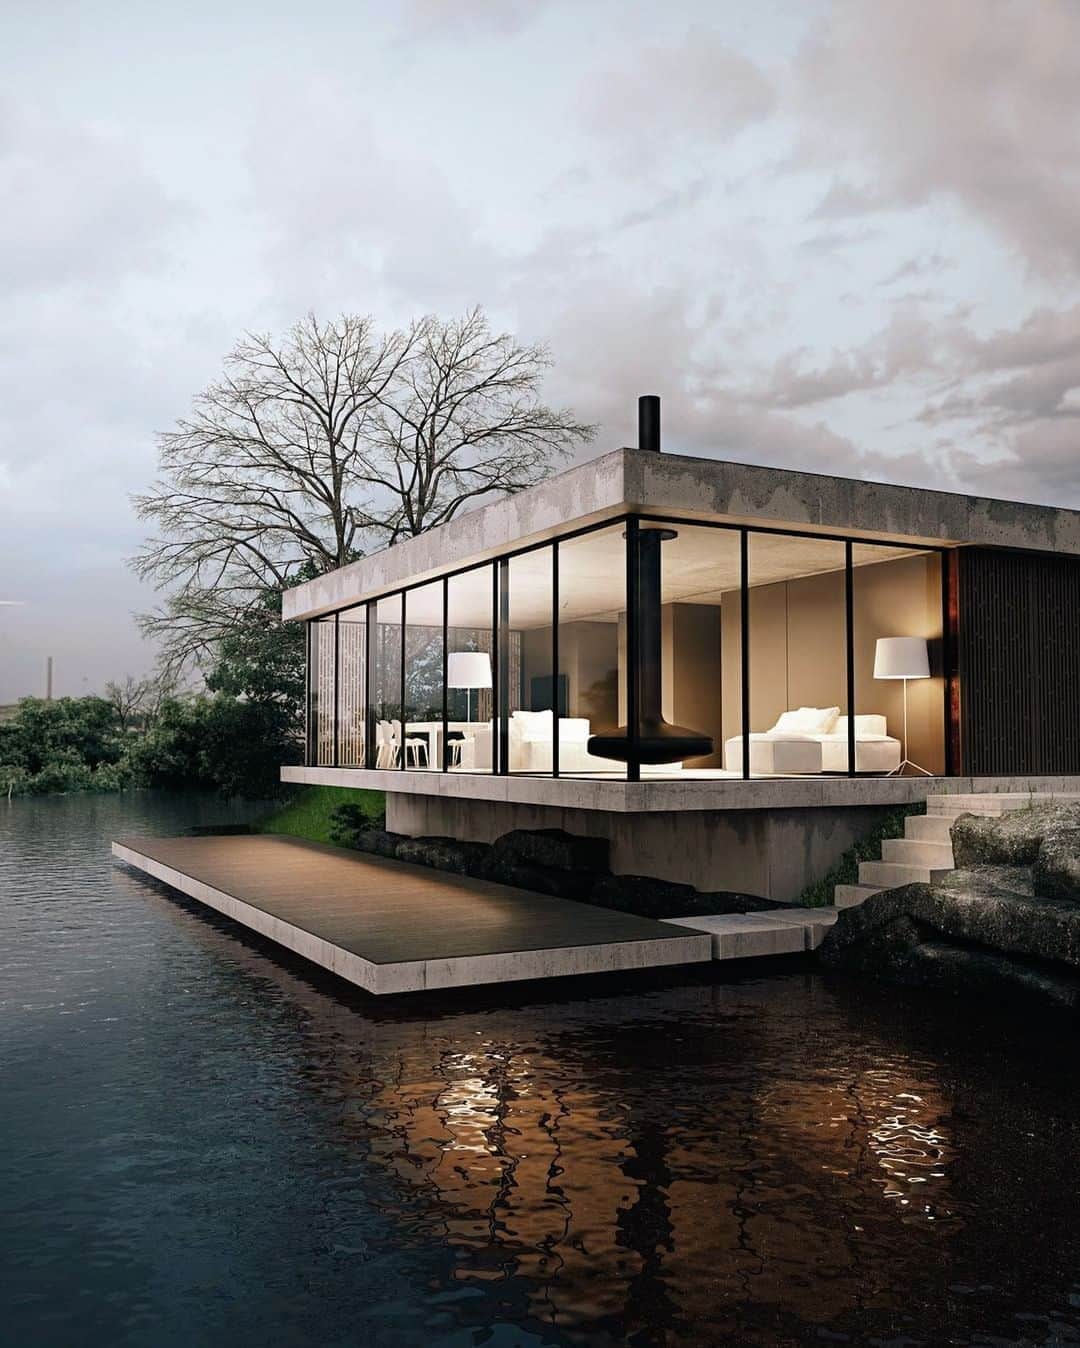 Architecture - Housesのインスタグラム：「⁣ LOUNGE House ⤵️⁣⁣ This residential house combines modernity and quality thanks to the use of materials such as concrete, glass and wood. ⁣ ⁣ Taking advantage of the beauty of the lake to configure the whole structure of the house has been a key factor in its design. Leave your thoughts below 👇👇⁣⁣ _____⁣⁣⁣⁣⁣⁣⁣⁣⁣⁣⁣ 📐  Illia Tovstonog + @makhno_design⁣ 📍Ukraine⁣ #archidesignhome⁣⁣⁣⁣⁣⁣⁣ _____⁣⁣⁣⁣⁣⁣⁣⁣⁣⁣⁣ #design #architecture #architect #arquitectura #luxury #architettura #archilovers ‎#architecturephotography #amazingarchitecture⁣ #lookingup_architecture #artdepartment #architecturallighting #house #archimodel #architecture_addicted #architecturedaily #arqlovers #Ukraine #KyivRegion #makhnoarchitects #makhno #design #arc_only #design_only #igukraine #igerskiev」